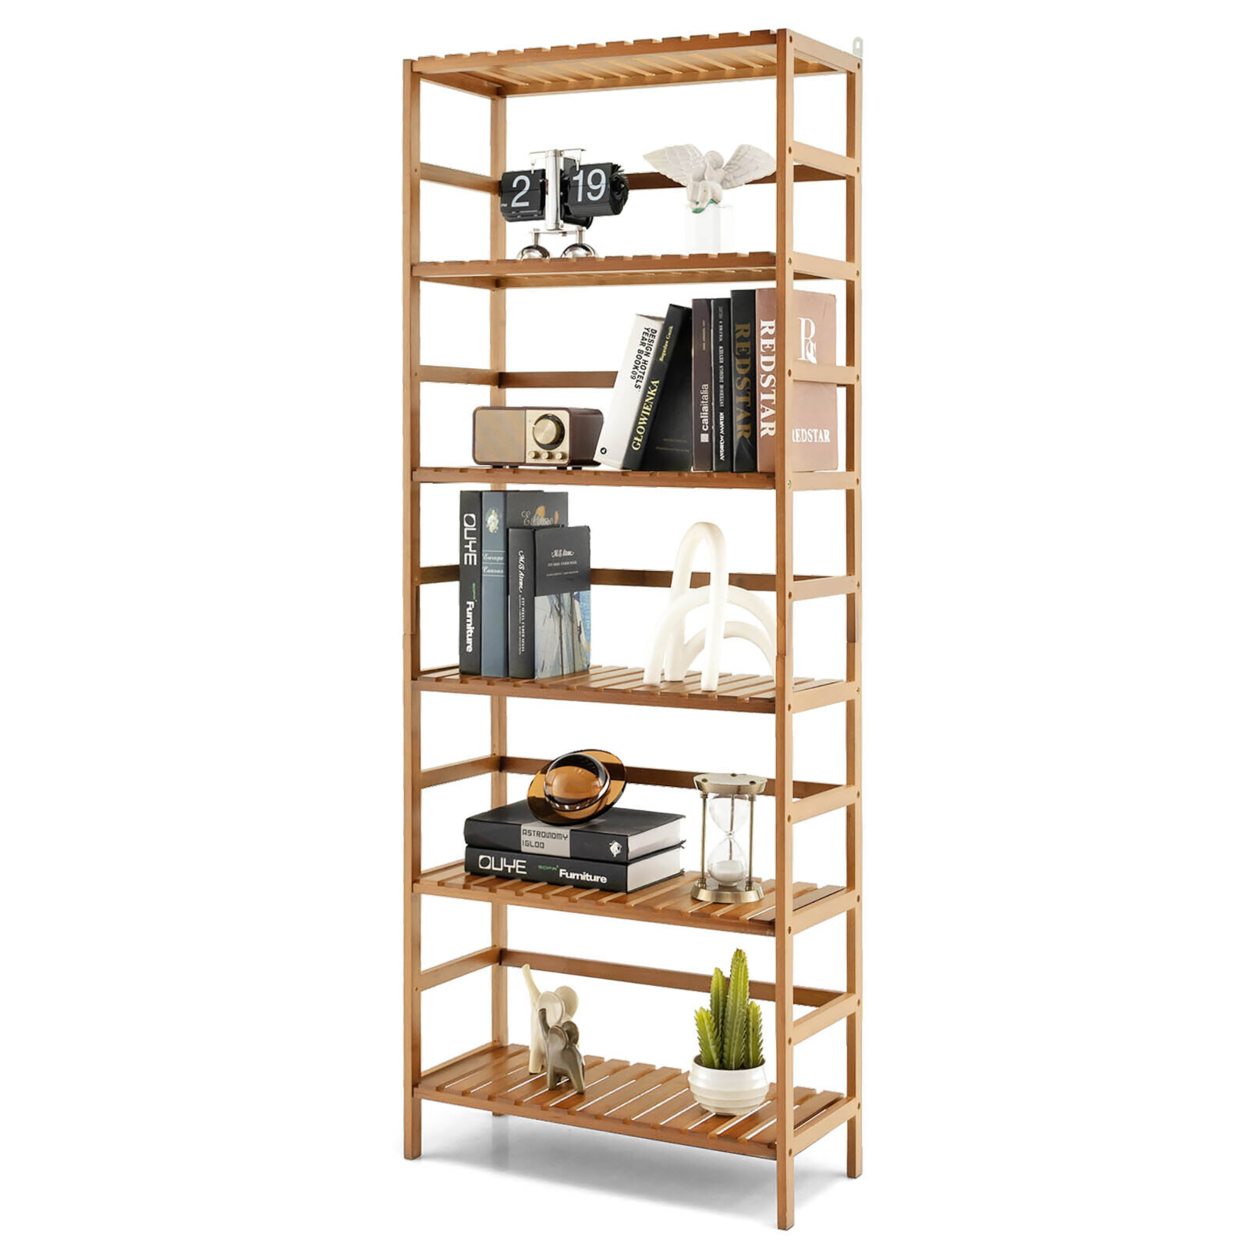 6 Tier Bamboo Bookcase 63'' Tall Storage Organizer W/ Adjustable Shelves Natural